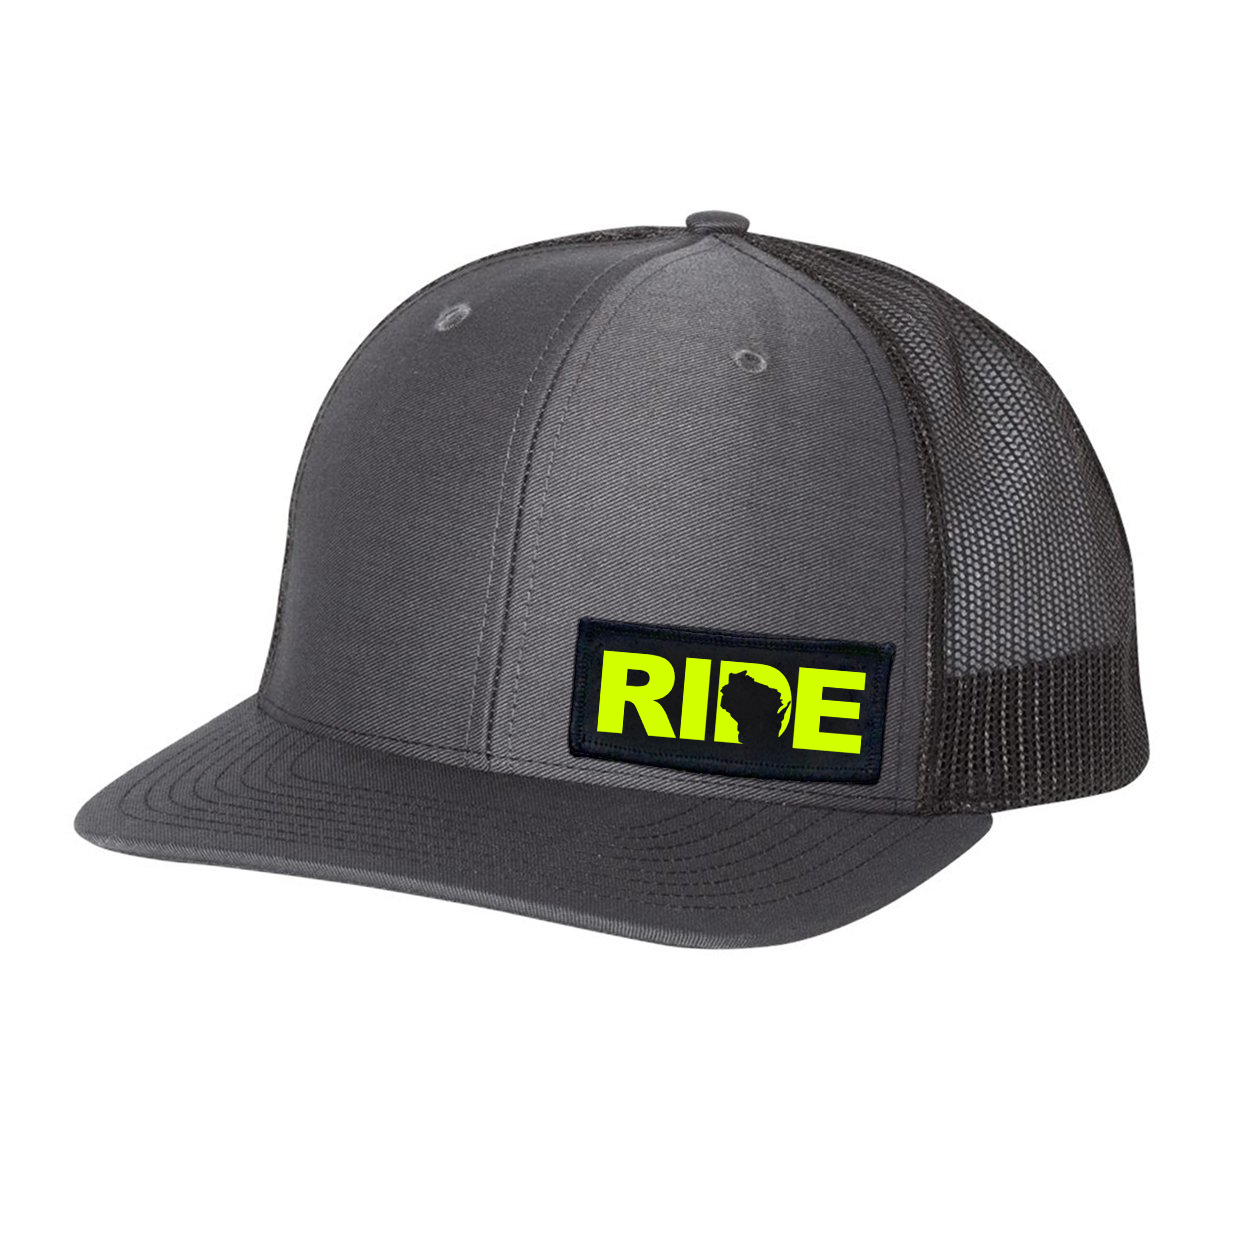 Ride Wisconsin Night Out Woven Patch Flex-Fit Hat Gray/Black (Hi-Vis Logo)